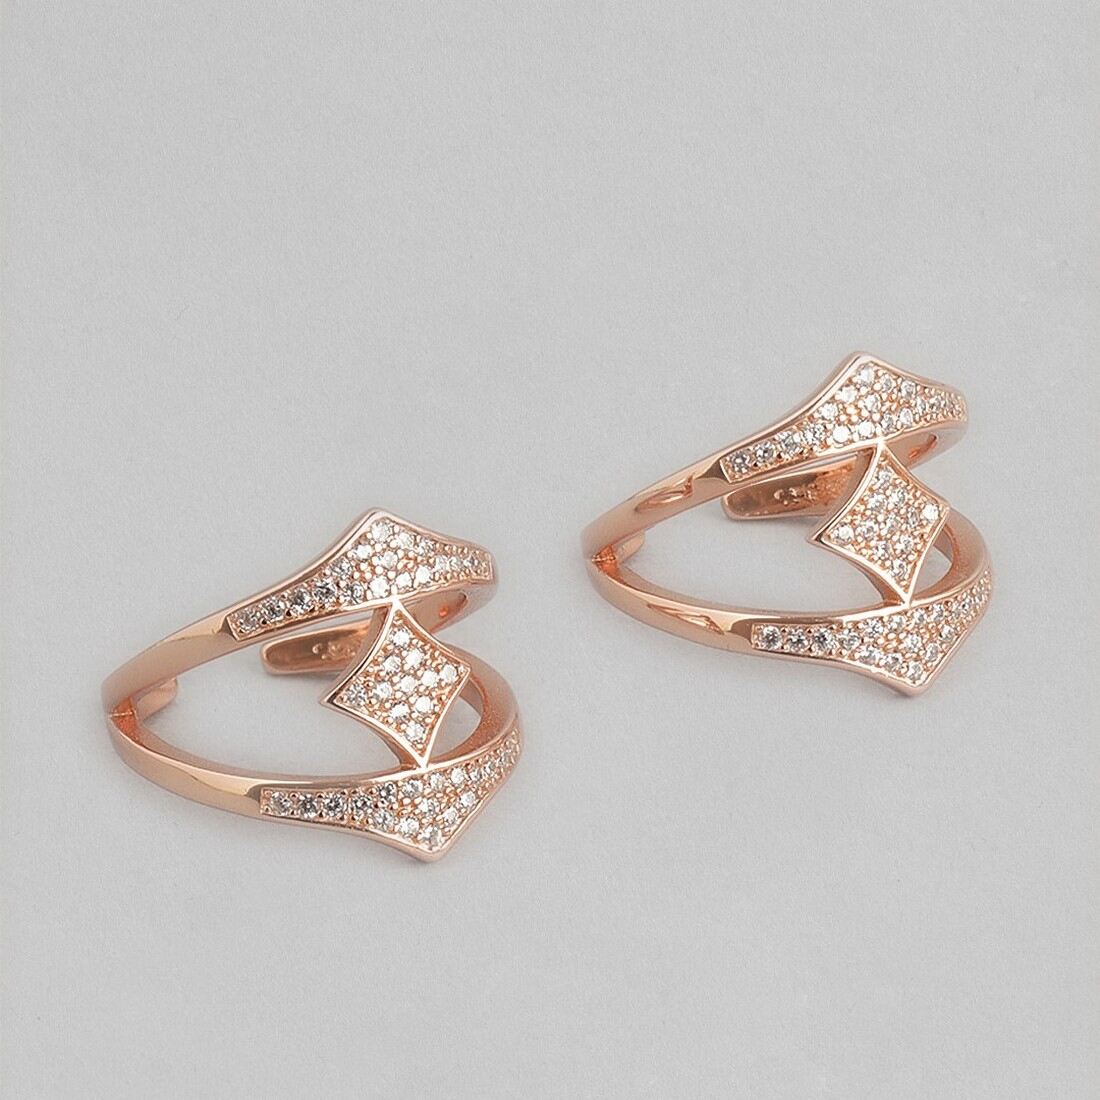 Newly Wed Rose Gold 925 Silver Toe Ring